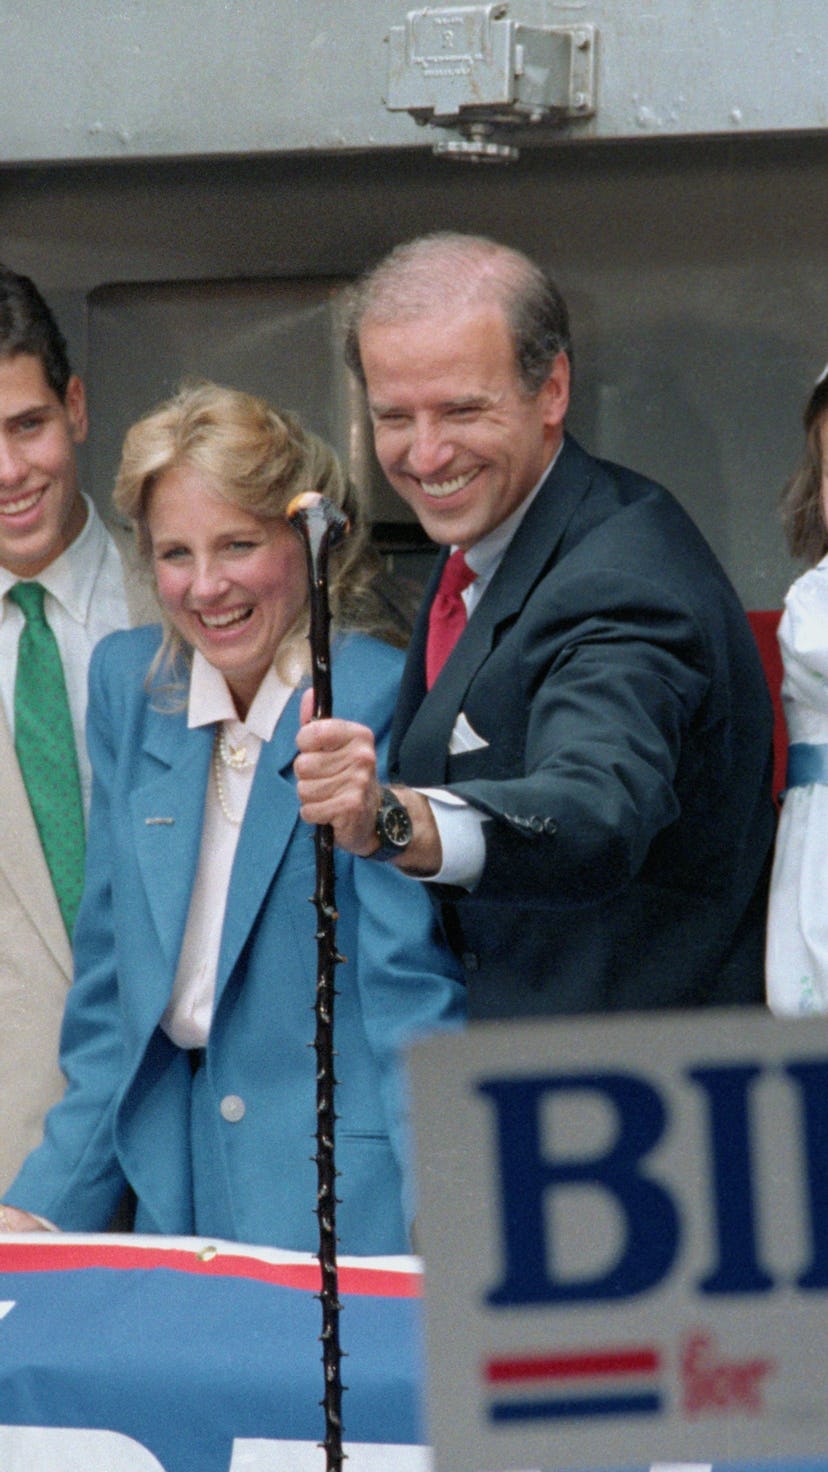 Joe Biden smiled with his family while announcing his run for president.